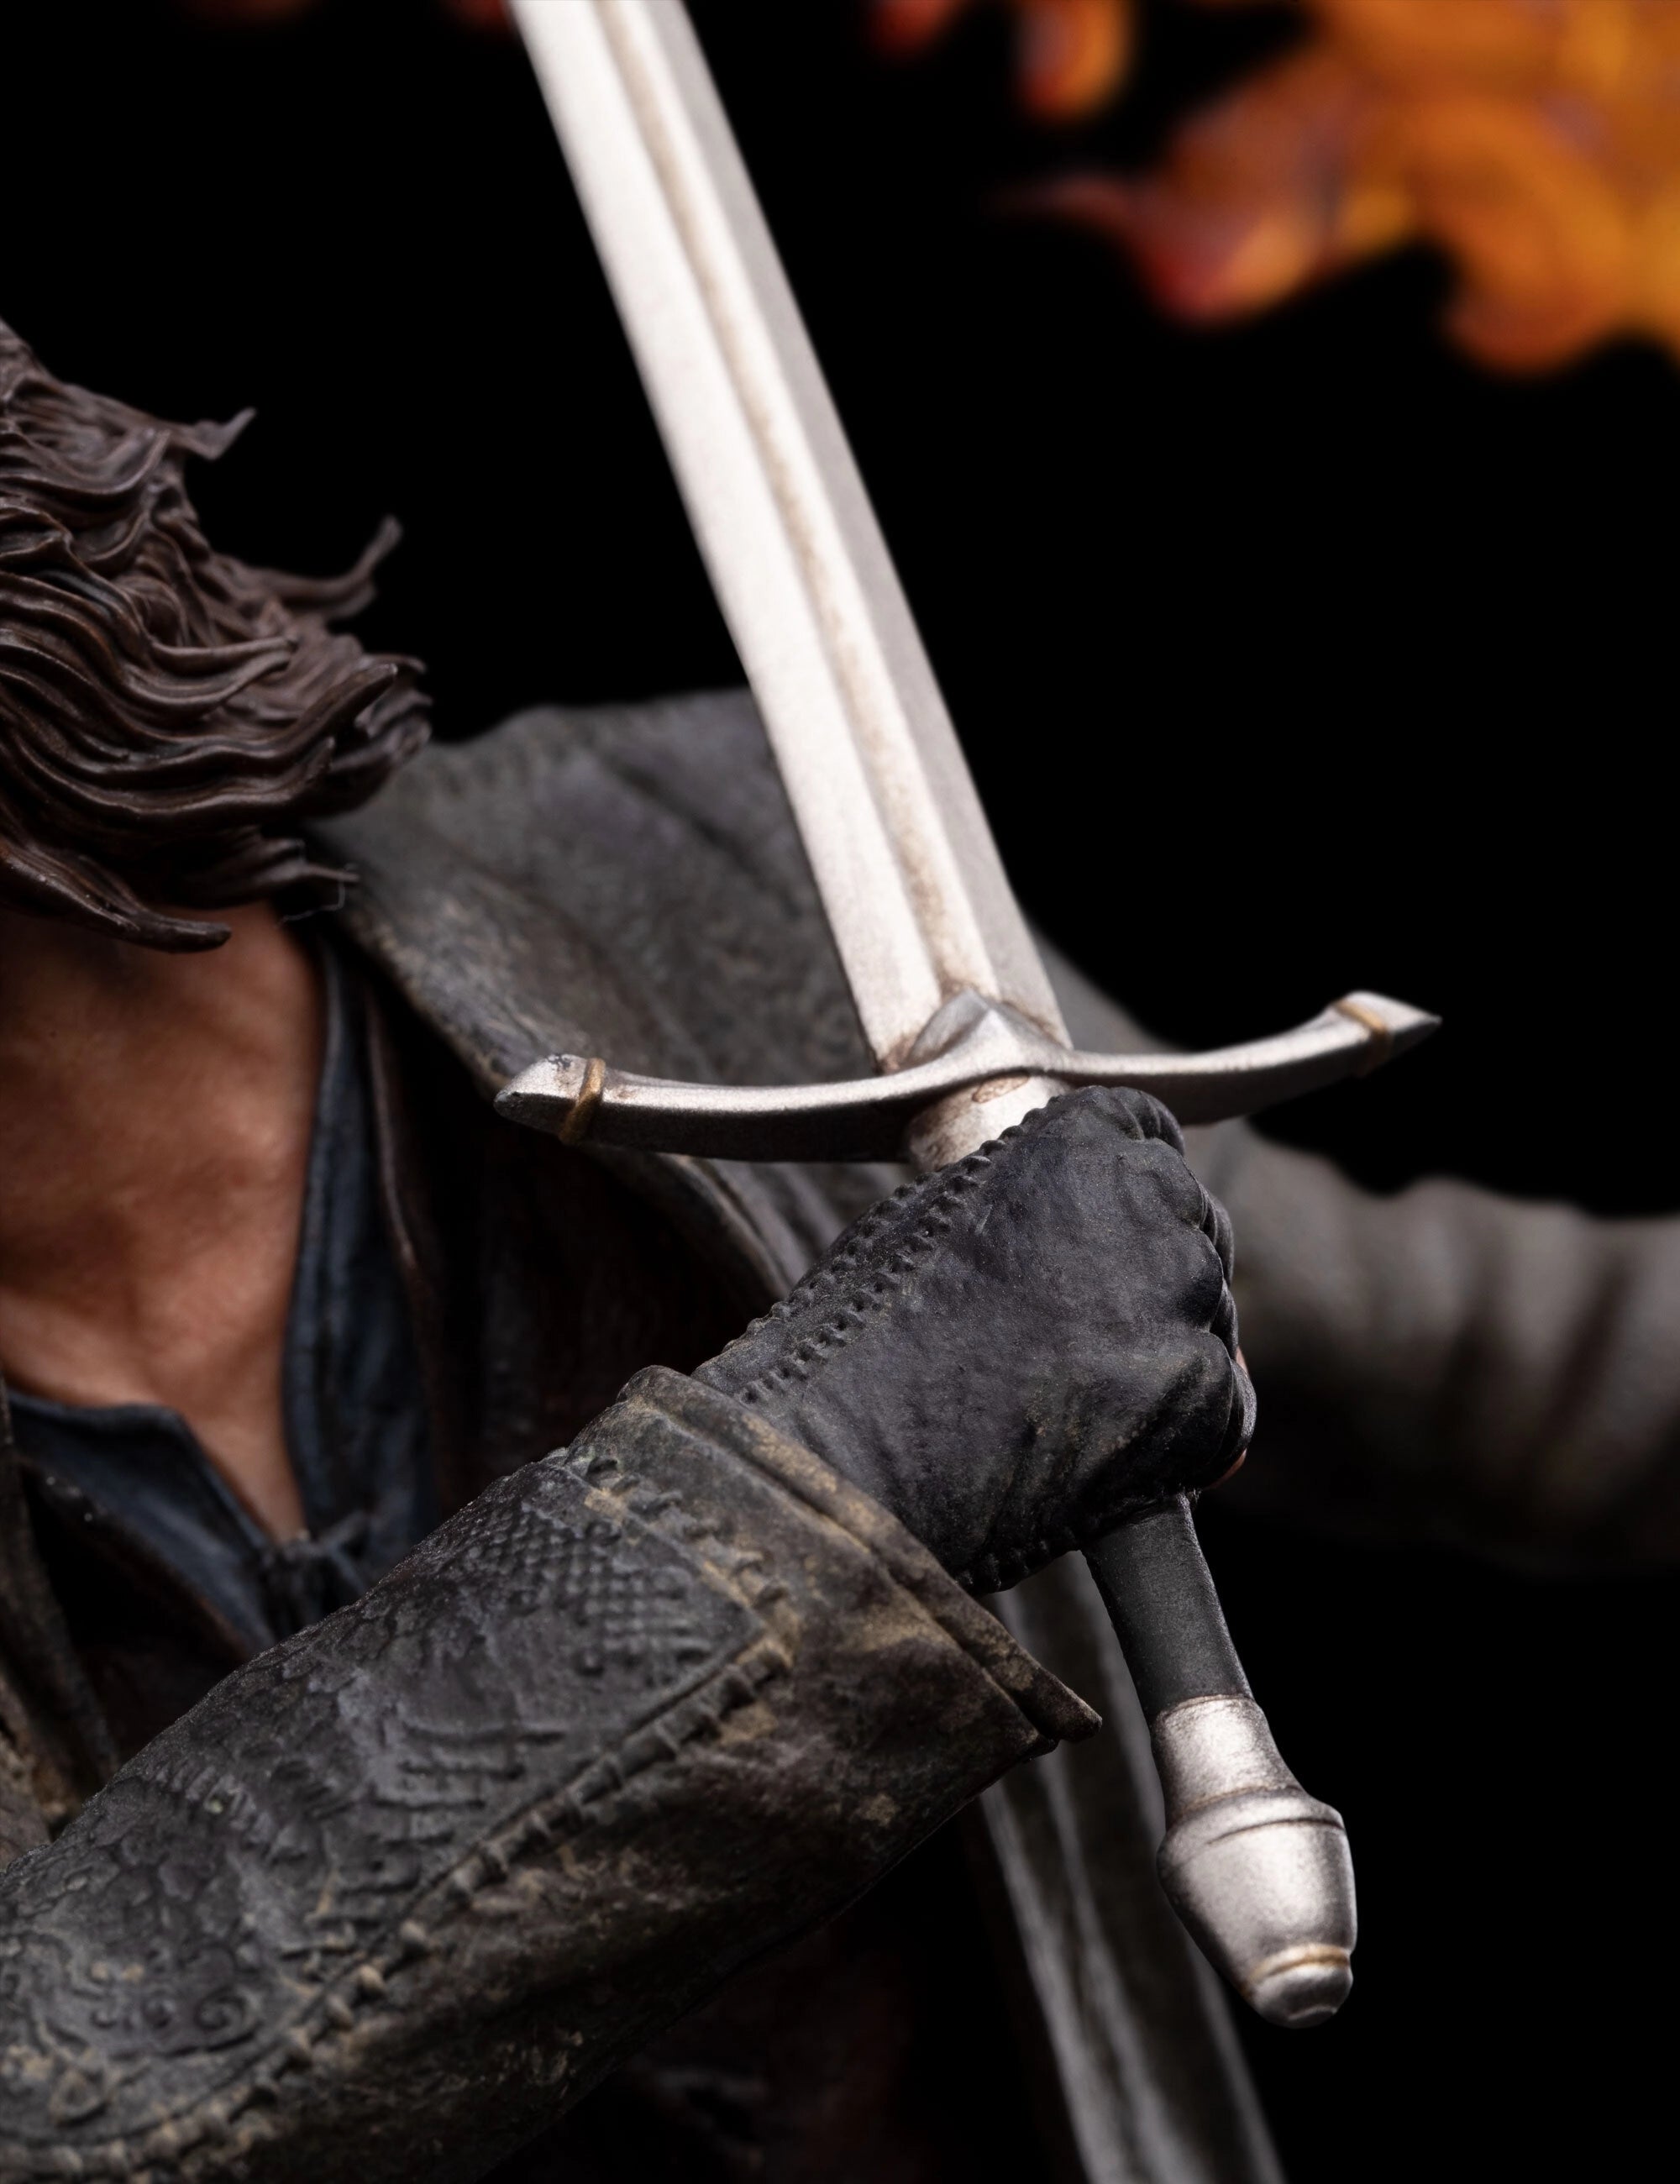 Aragorn with his Ranger Sword and a Flaming torch - Figures of Fandom The Lord of the Rings